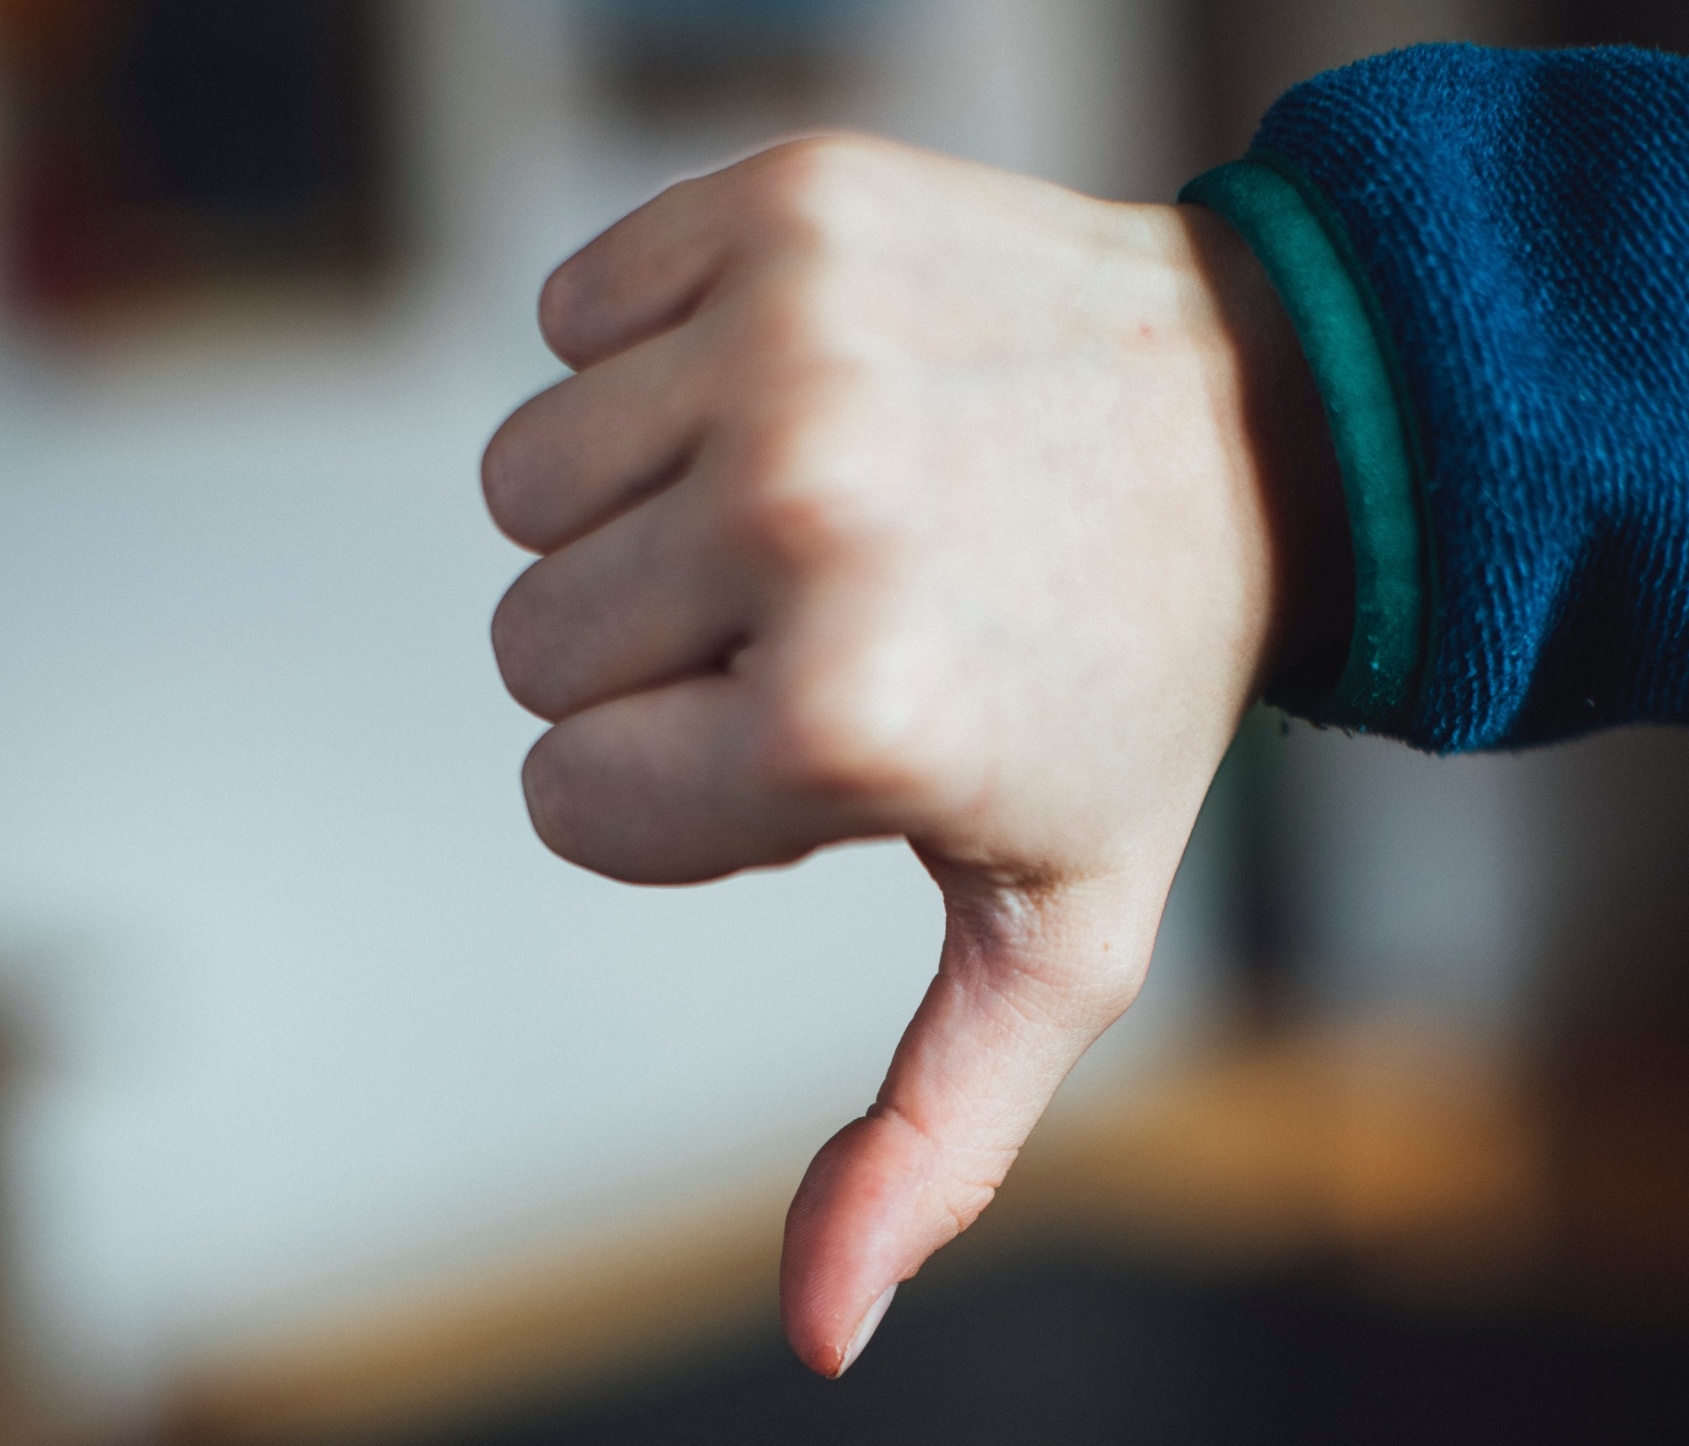 Thumbs down on advertising code. Photo by Markus Spiske on Pexels.com